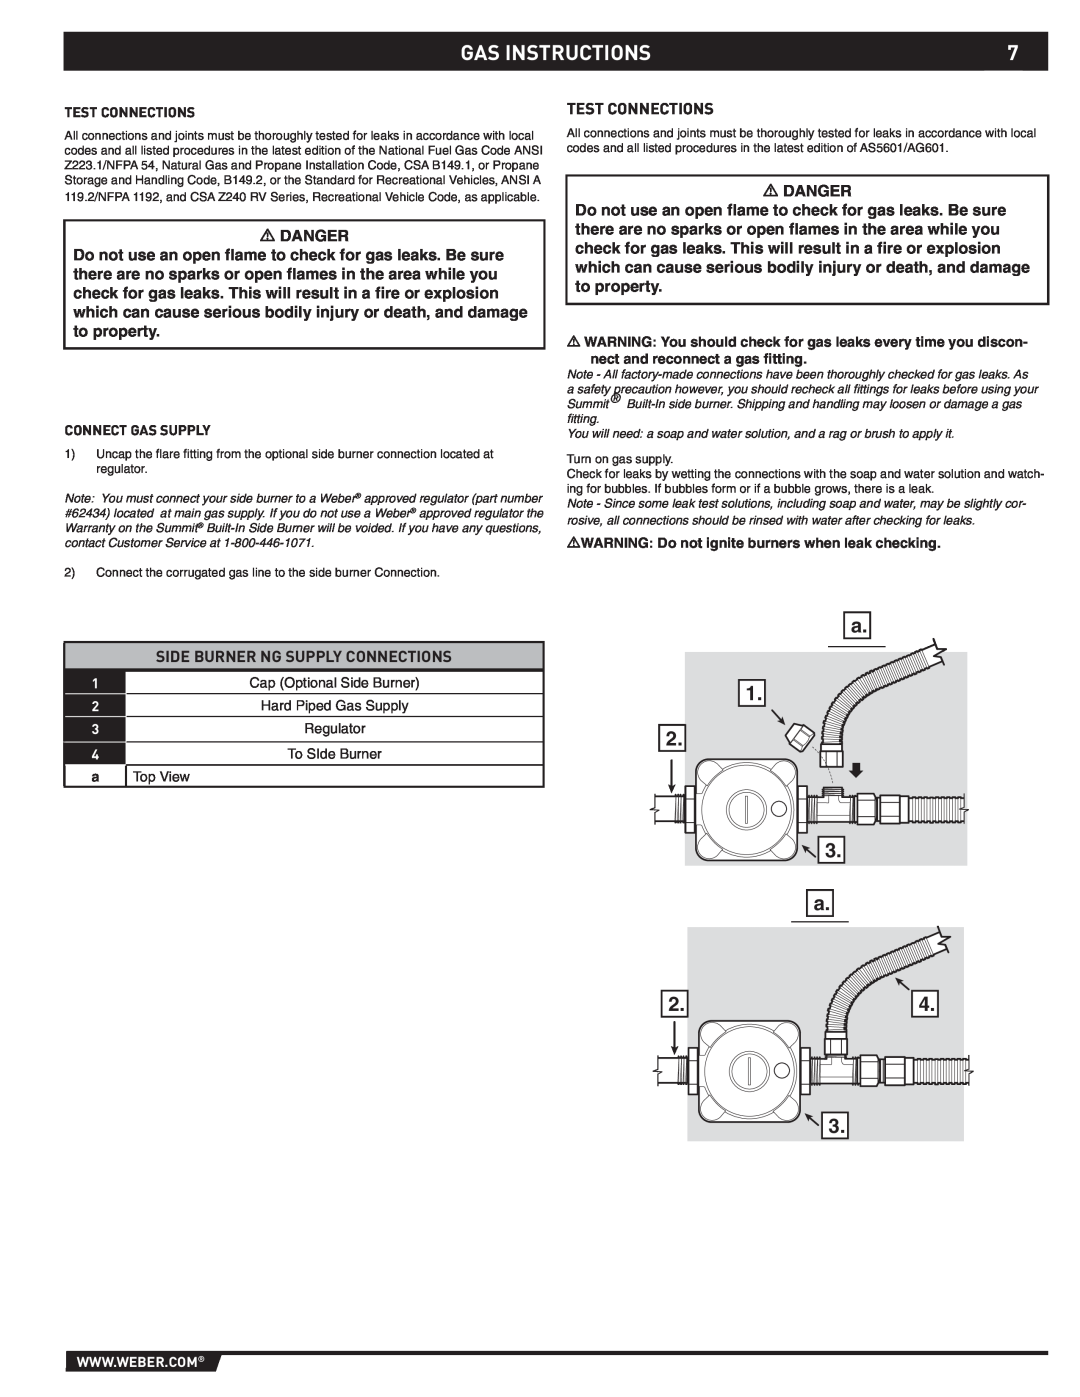 Summit 89795 manual Gas Instructions, a 1 2 3 a, Test Connections, Side Burner Ng Supply Connections, Connect Gas Supply 